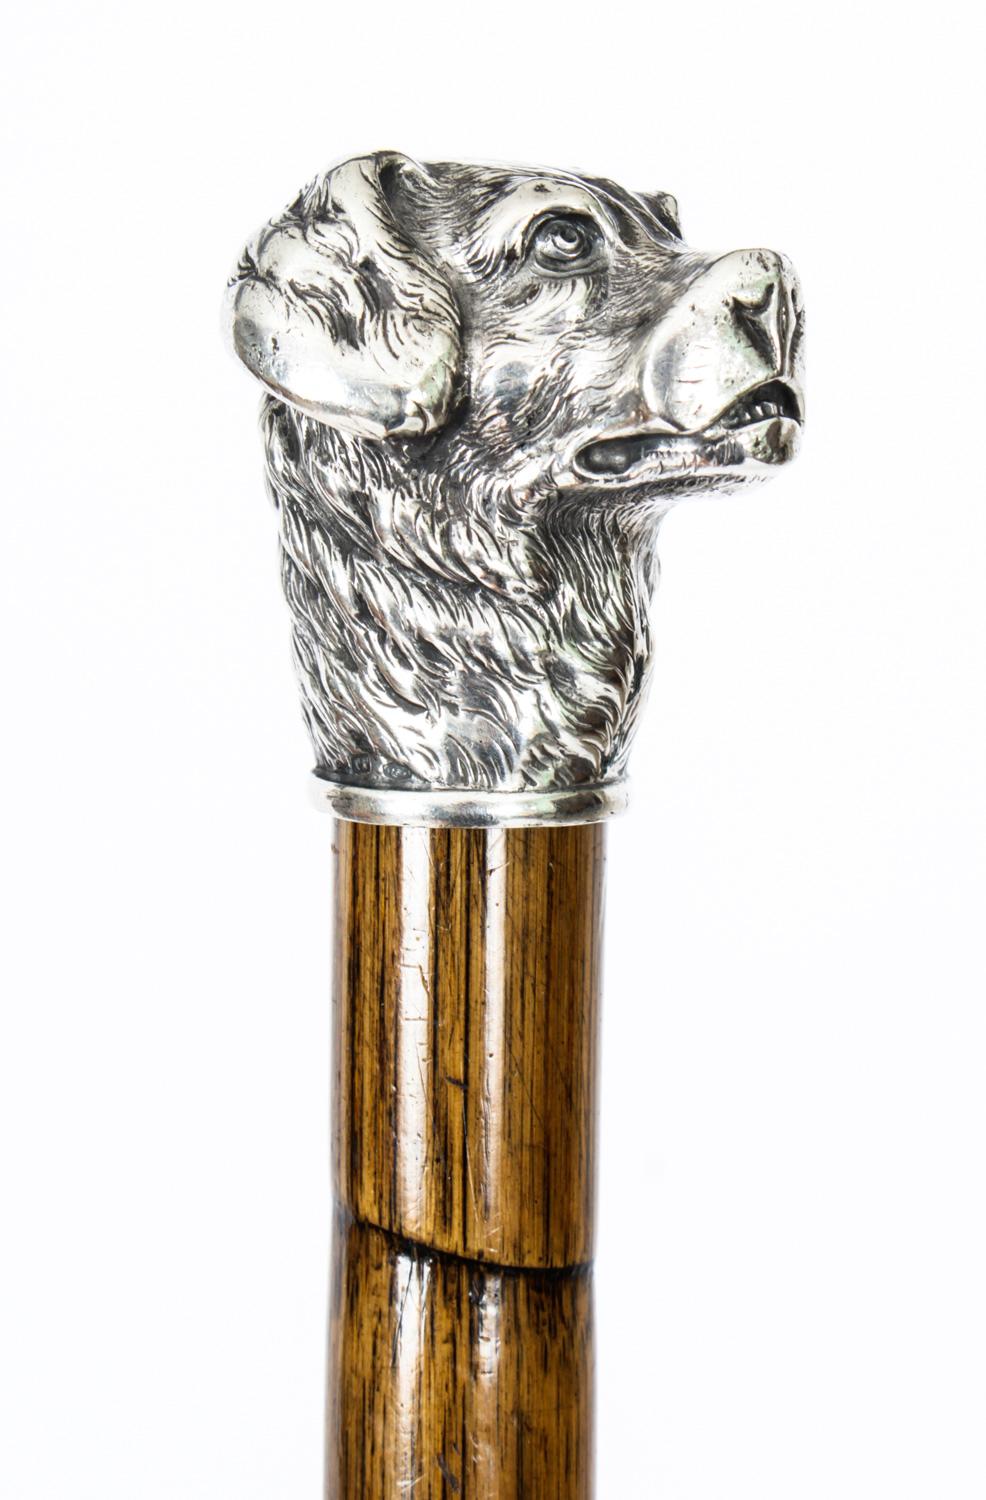 This is a fantastic antique French sterling silver alert gun dog ebonised walking stick by maker TP, with with export marks, circa 1900 in date .

It has a very decorative silver pommel depicting a finely cast dog with great attention to detail